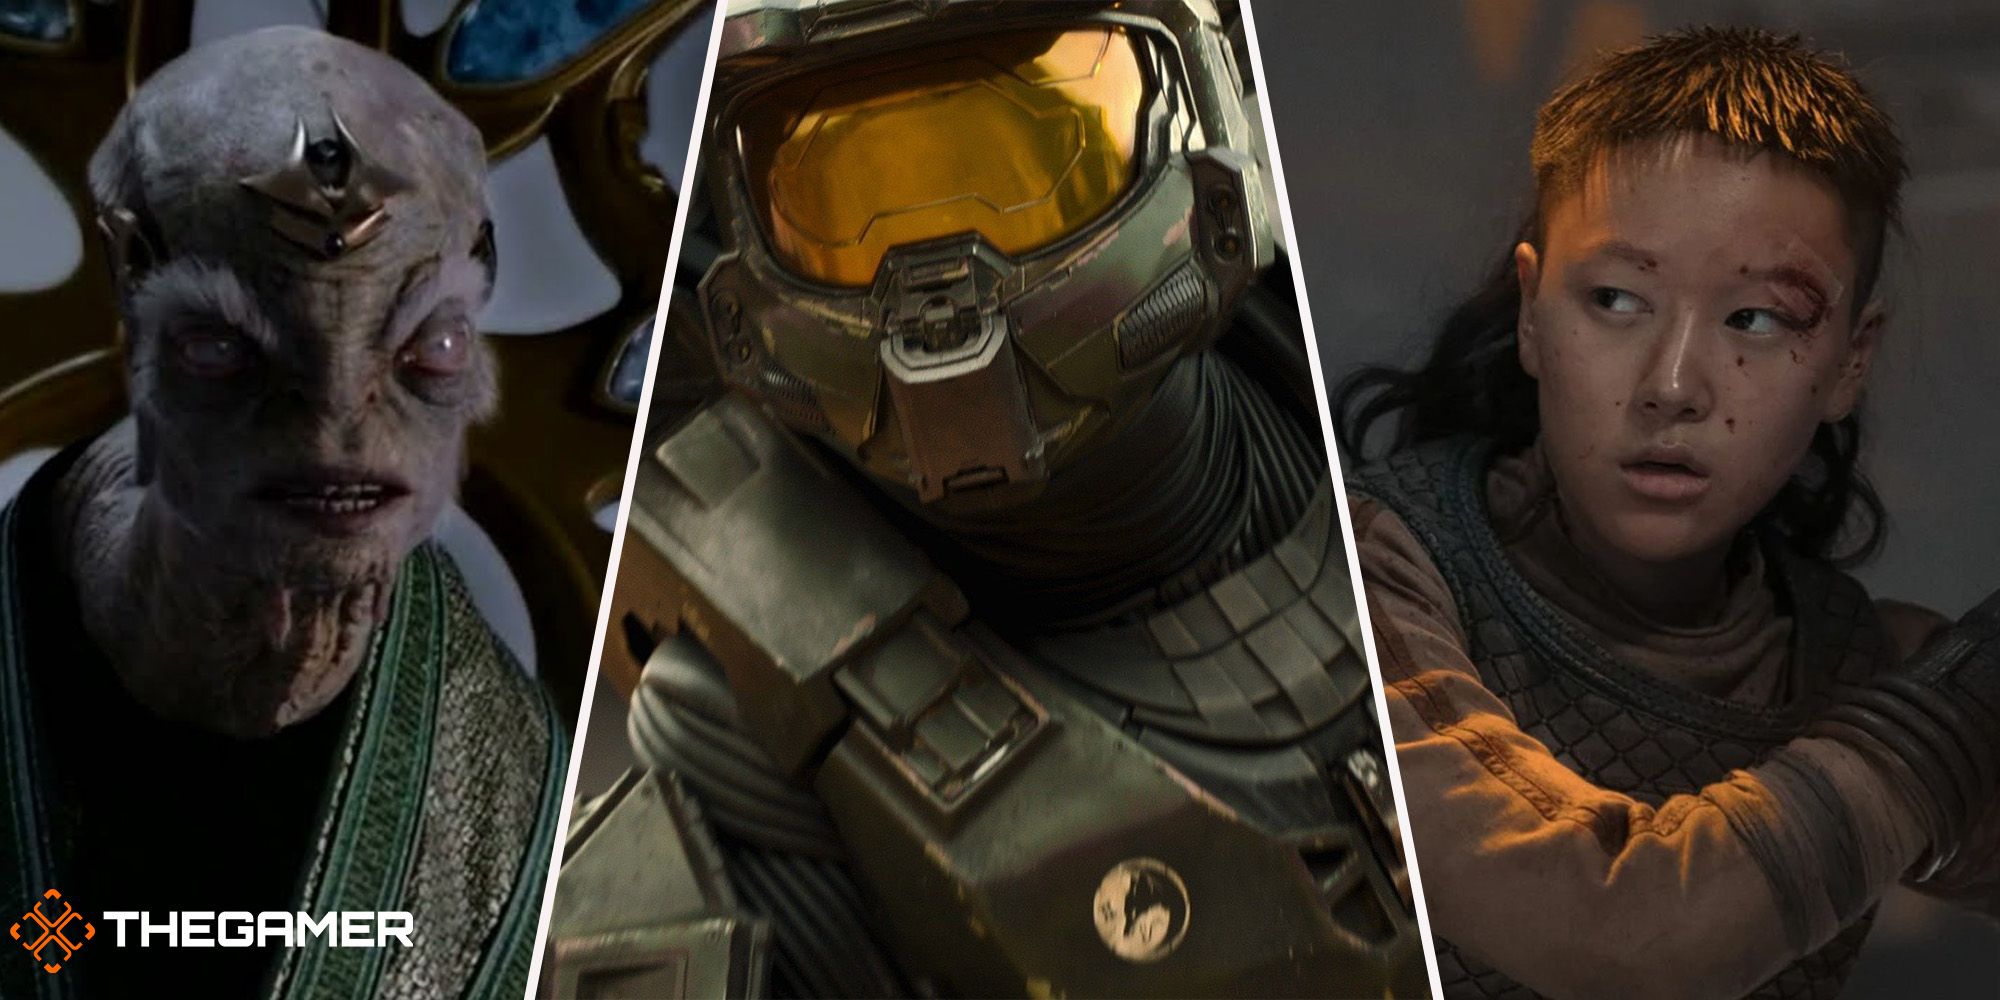 Halo TV Show: New Character Posters Revealed For Halsey, Soren, And Kwan -  GameSpot